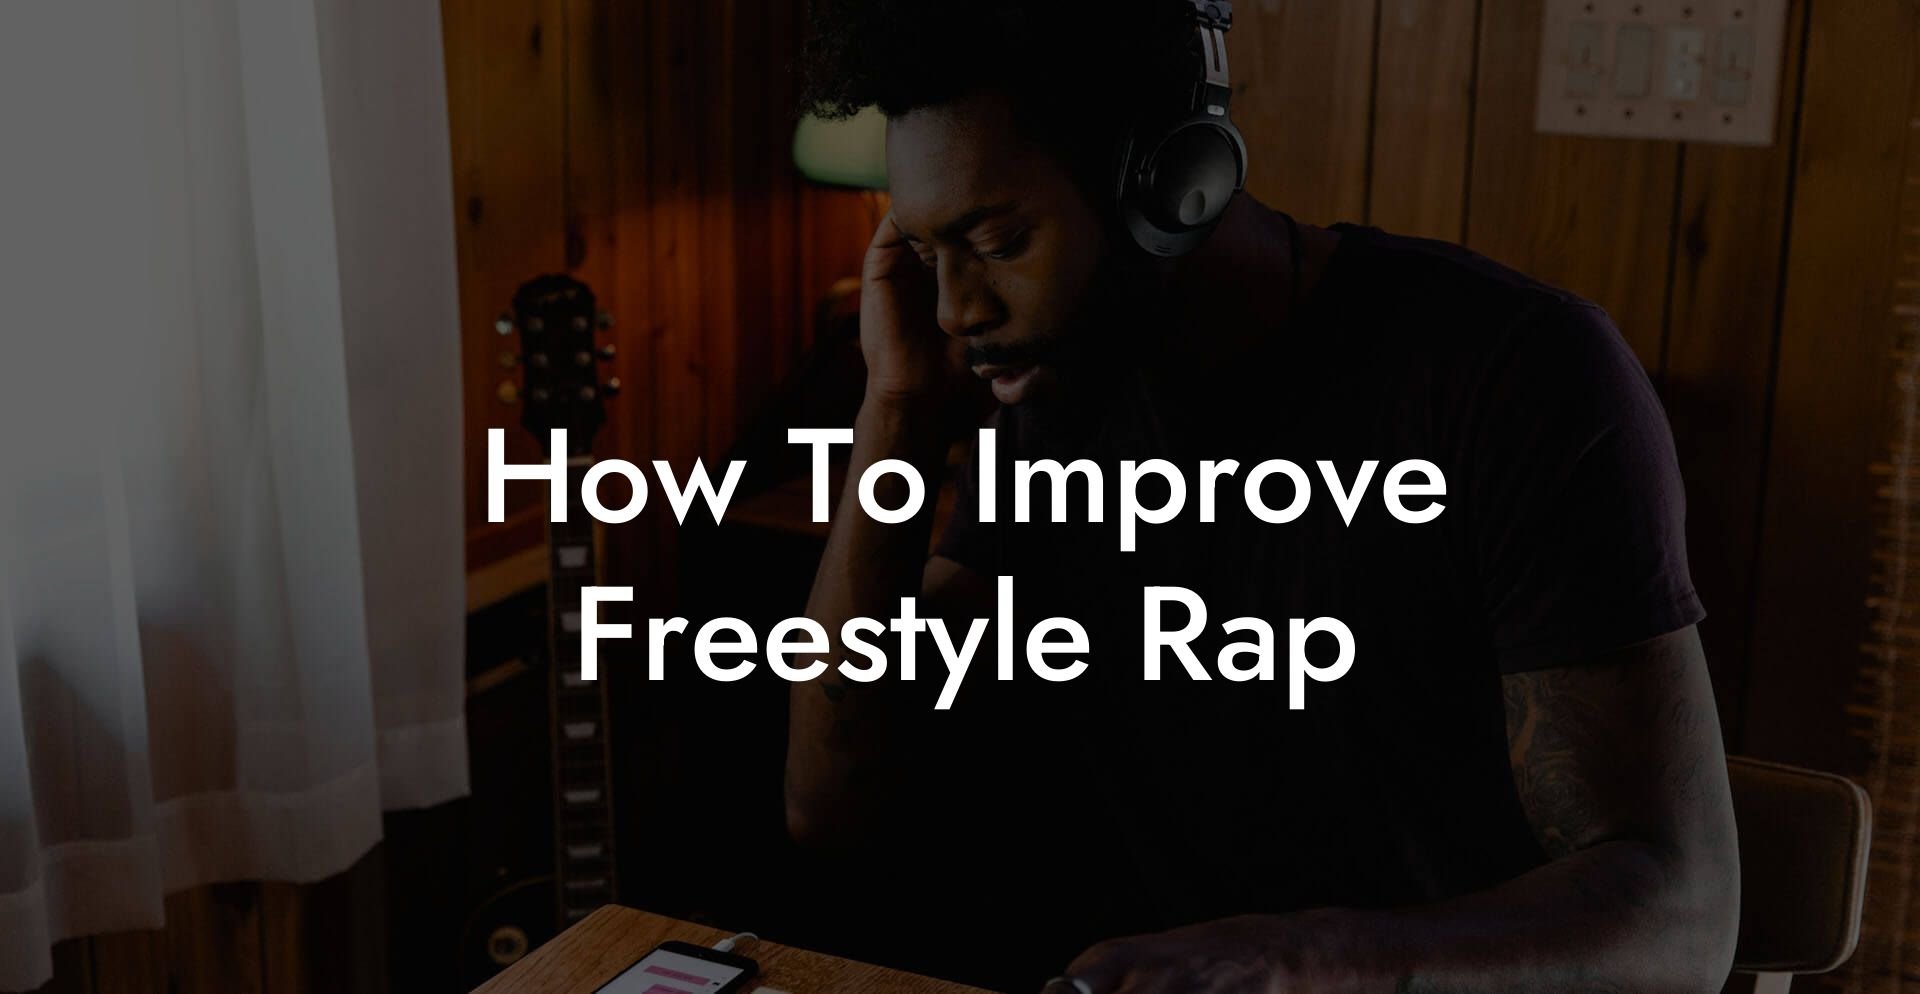 how to improve freestyle rap lyric assistant